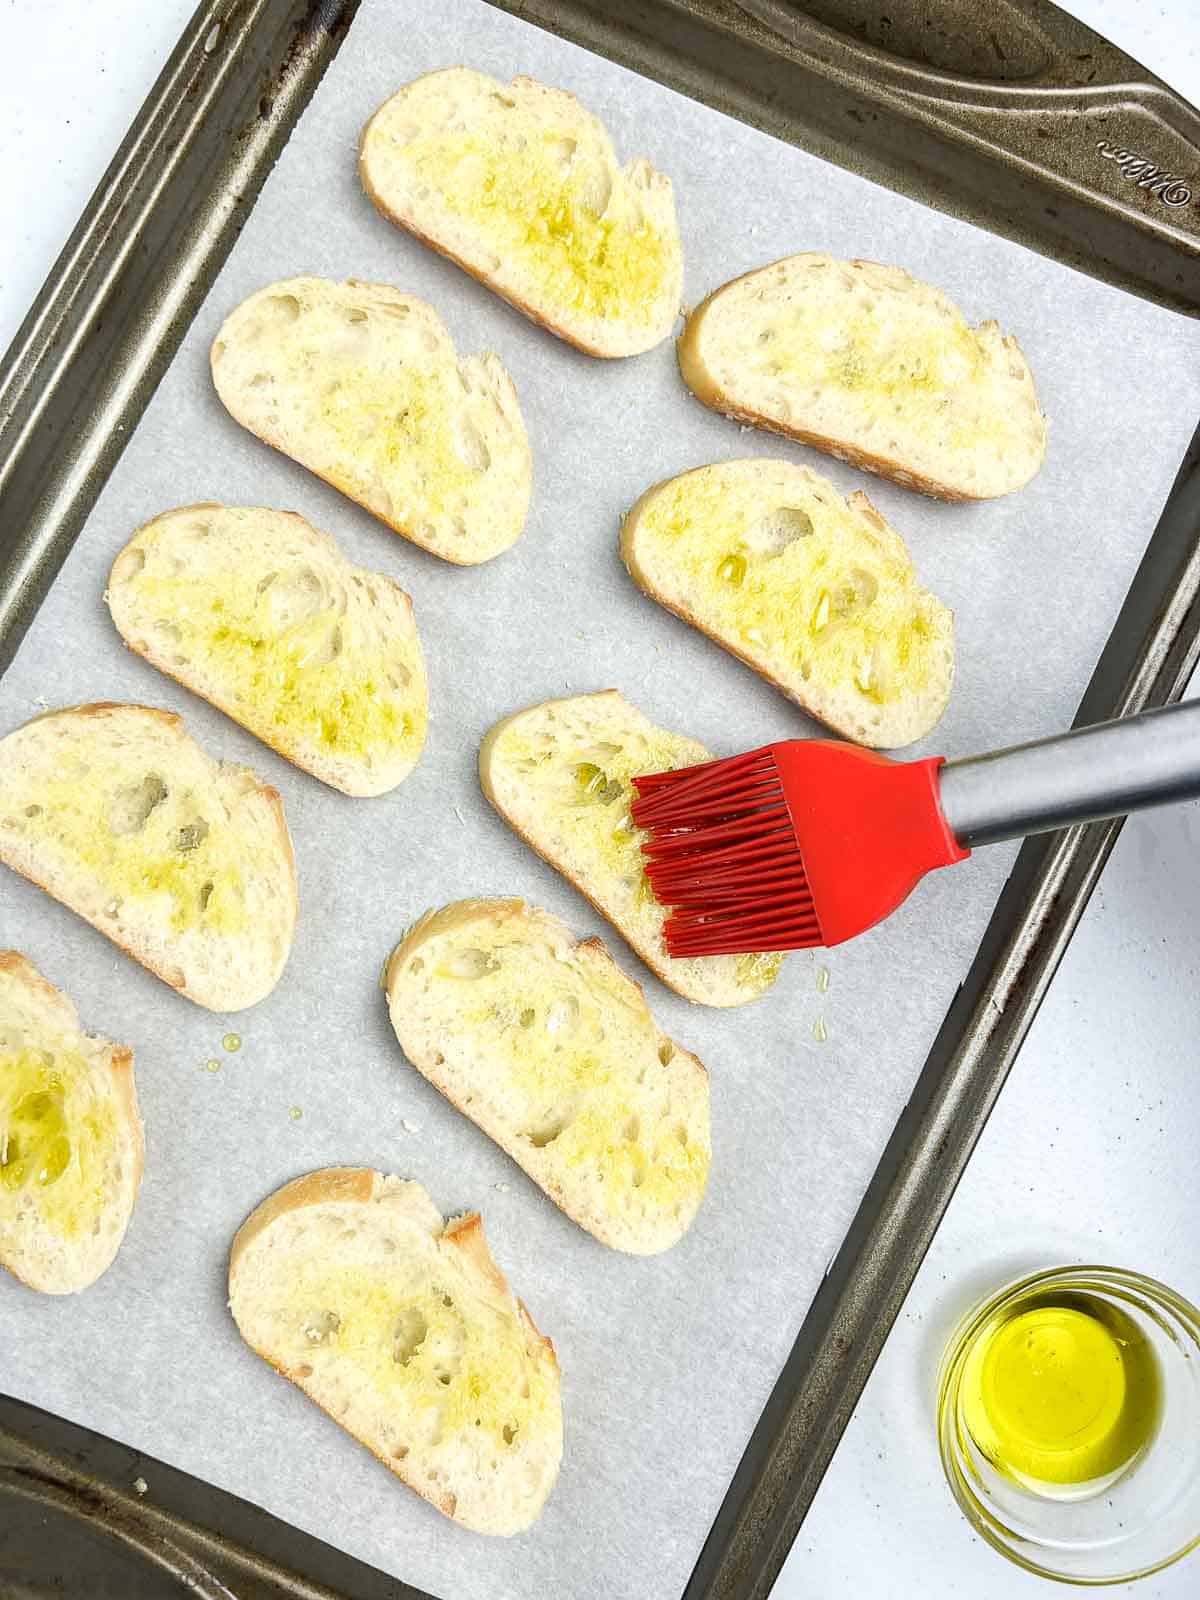 Brushing baguette slices with olive oil before toasting to make crostini.